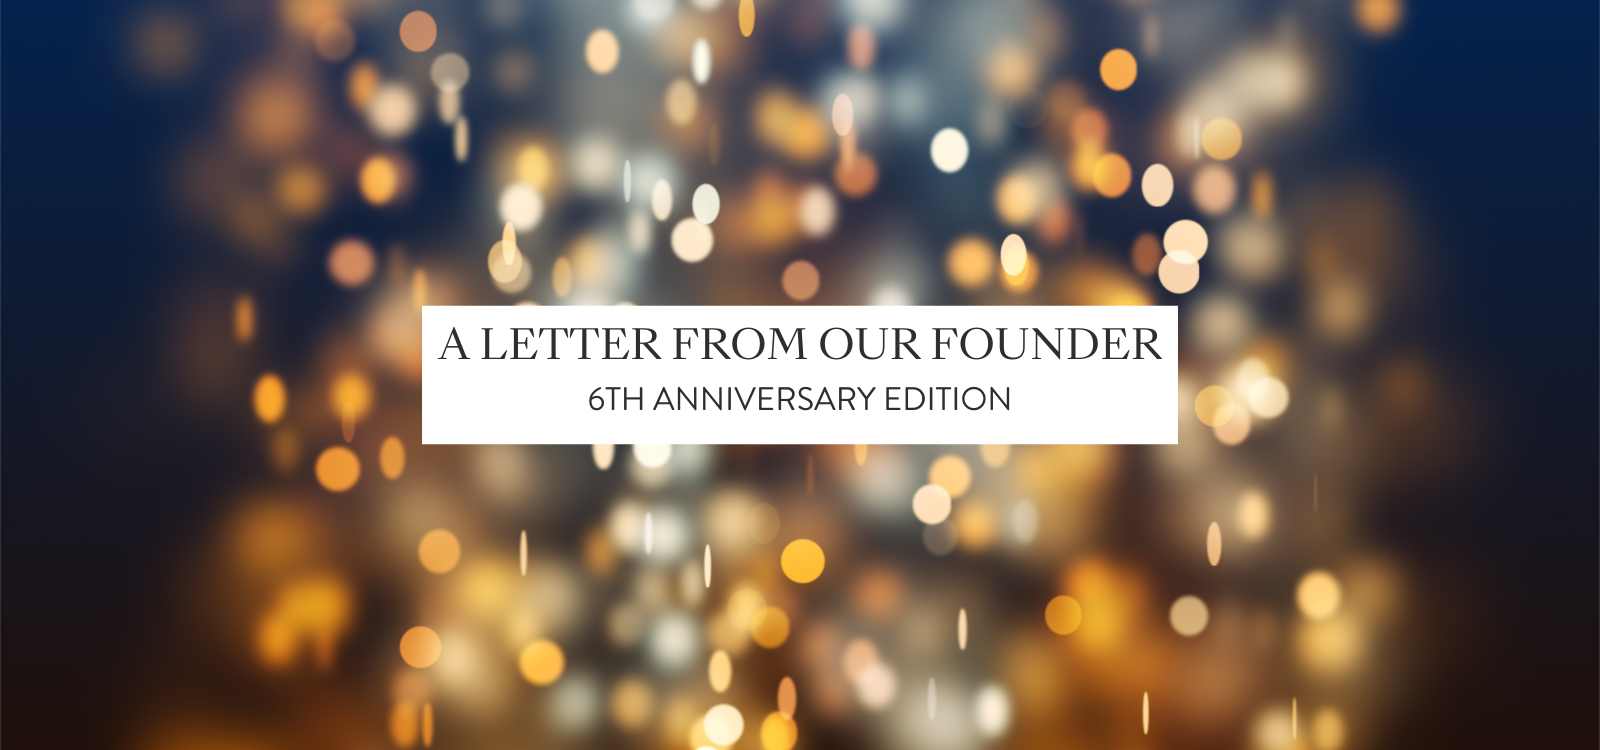 A Letter From Our Founder: 6th Anniversary Edition